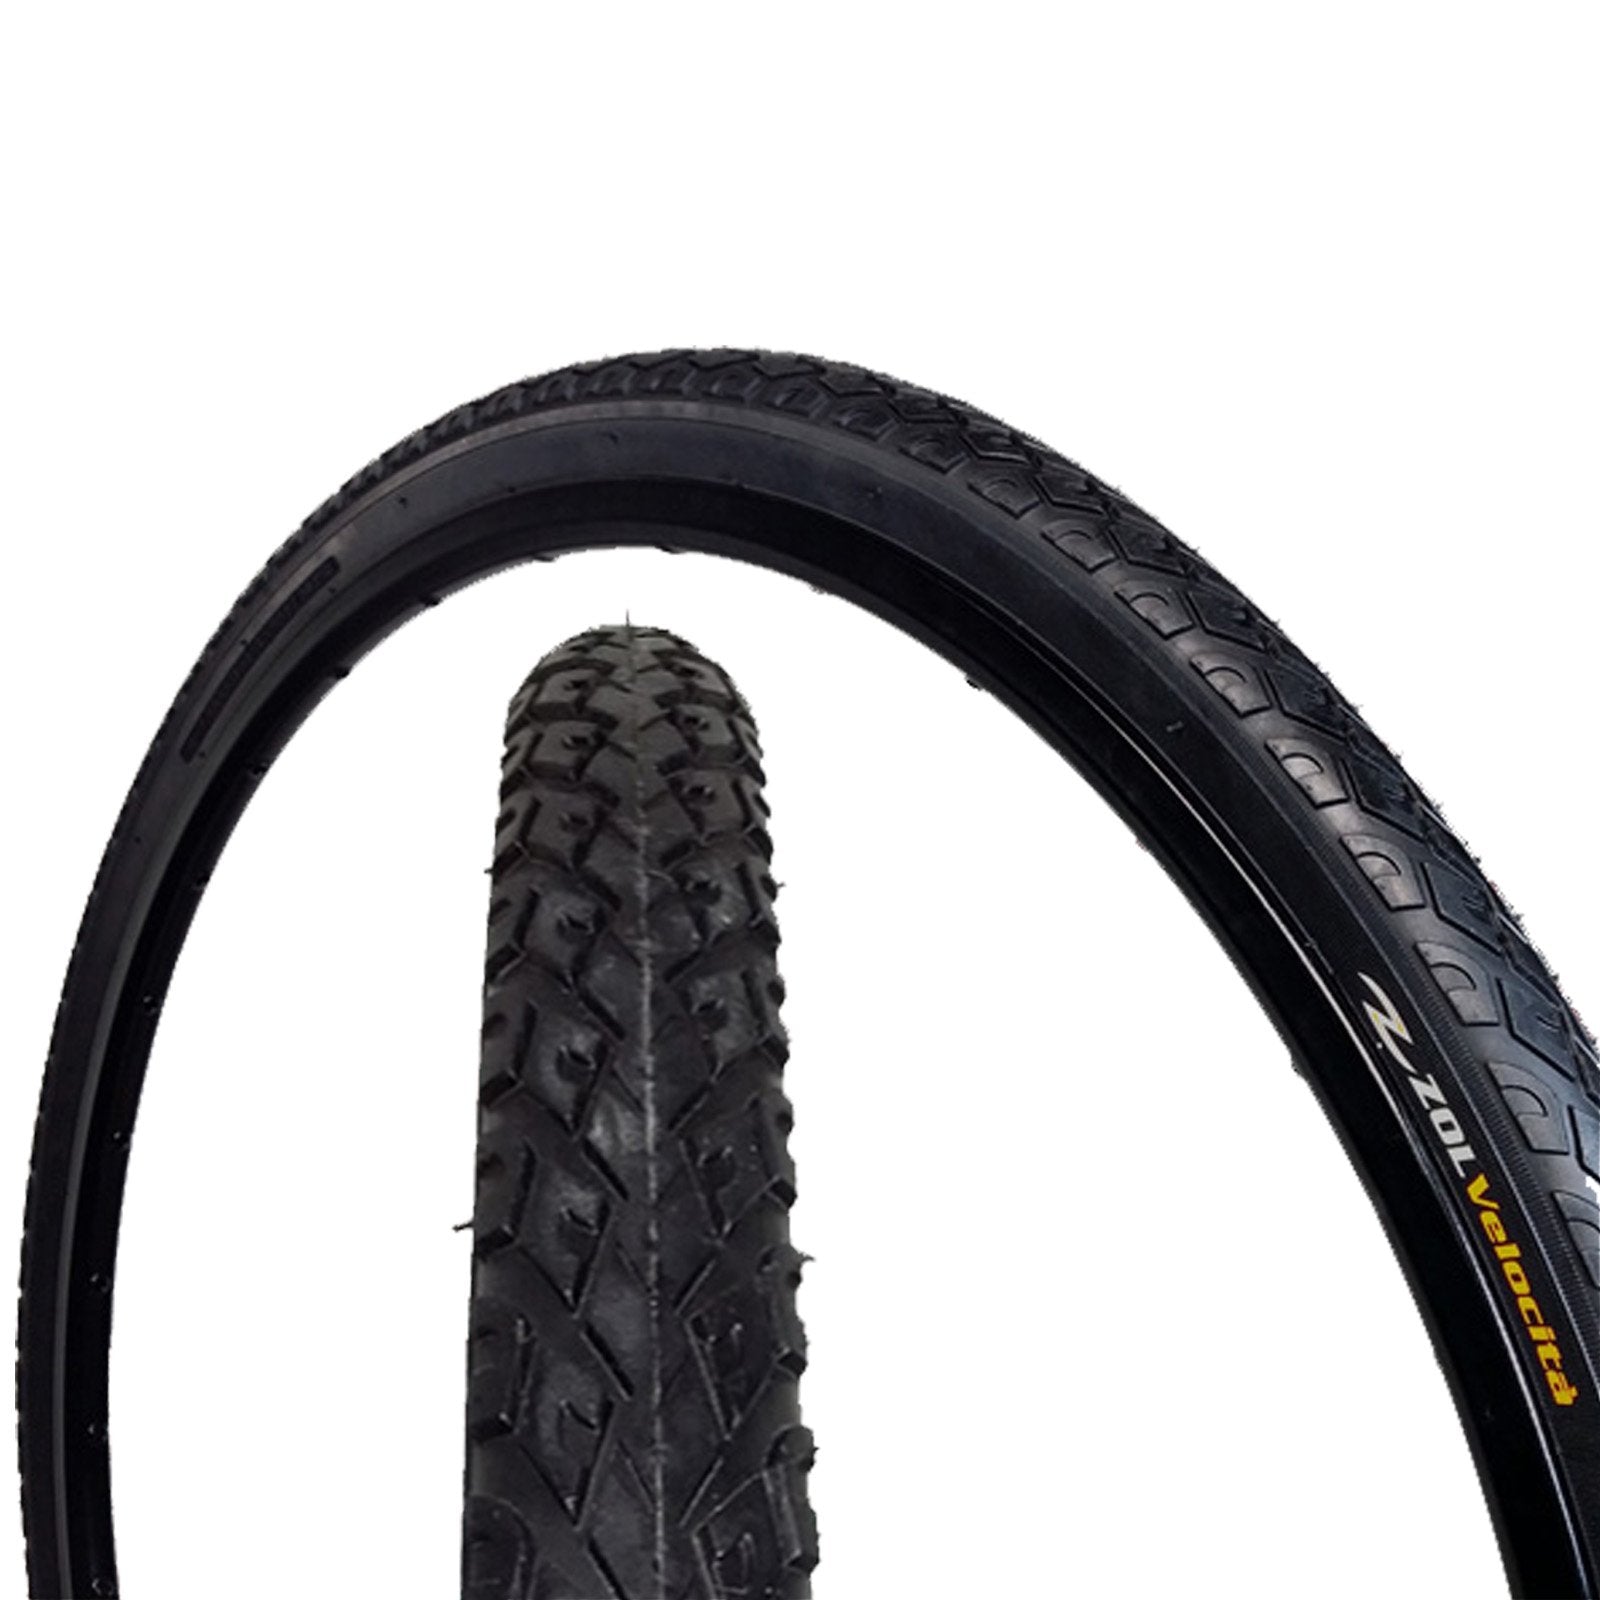 Zol Bundle 2 Pack Z2011 Urban Hybrid Tires and Tube 700x38C, French 48MM Valve - Zol Cycling